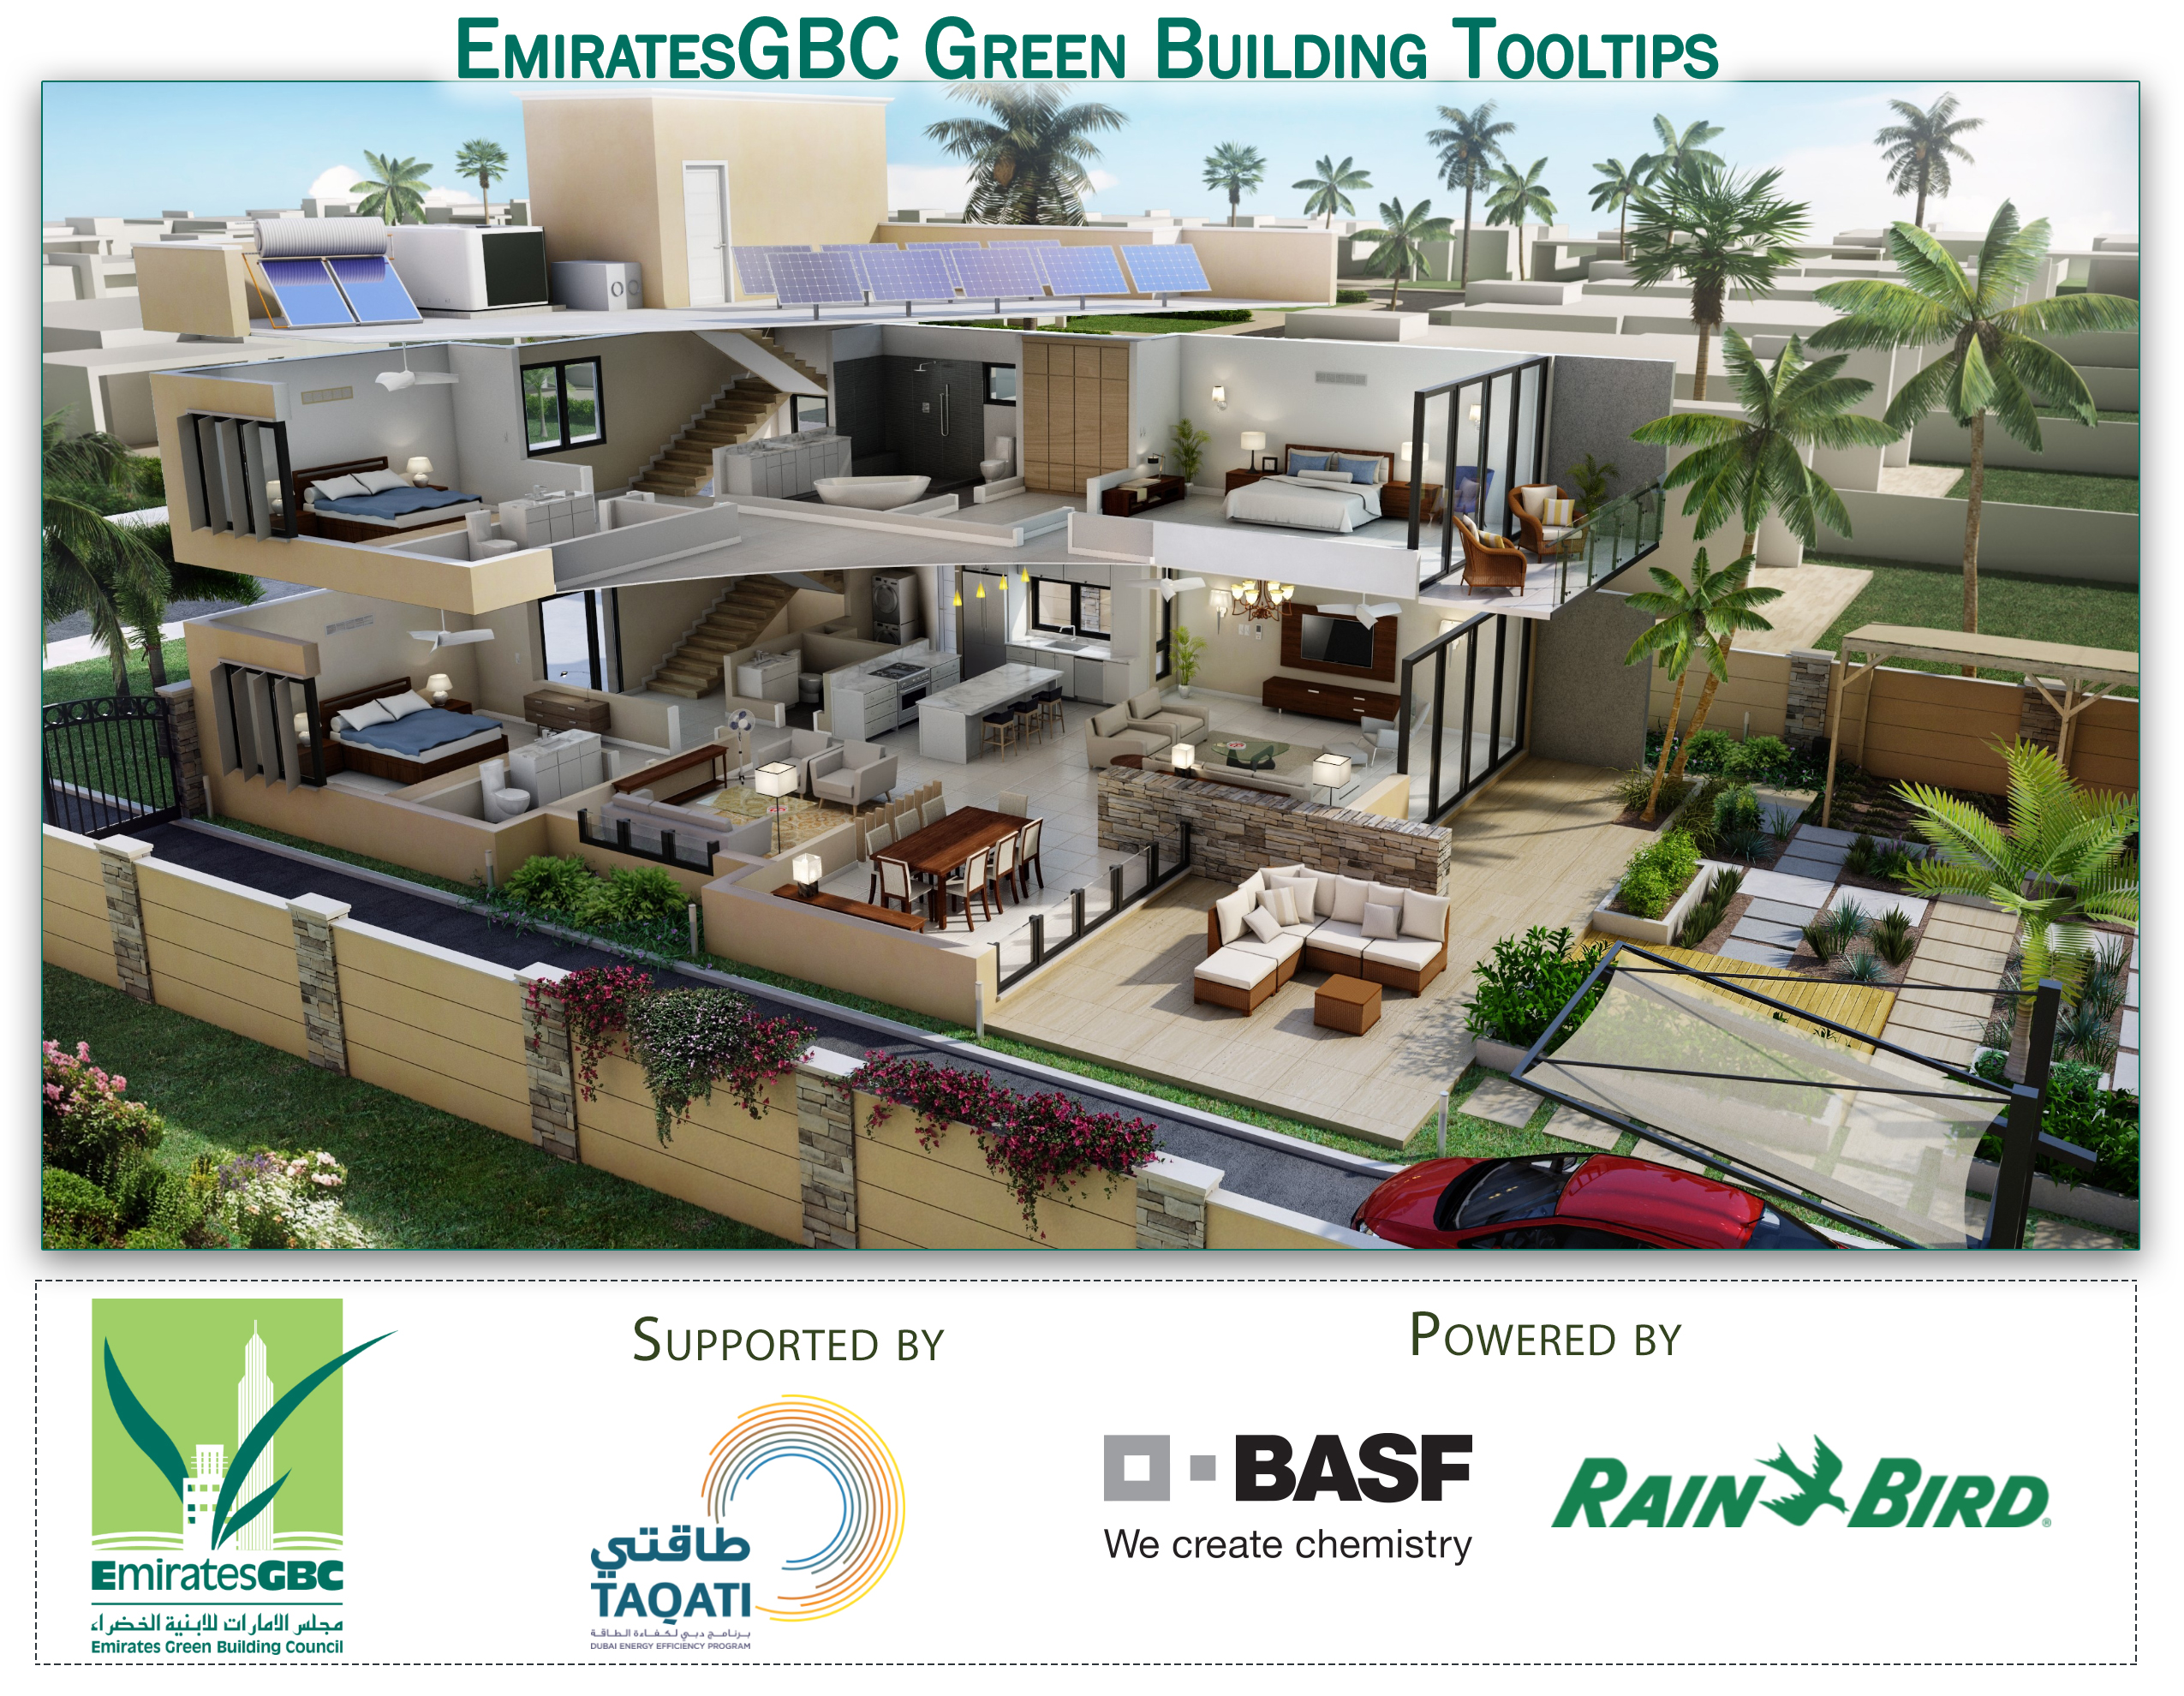 EmiratesGBC strengthens provision of Green Building Tooltips with the support of BASF and Rain Bird